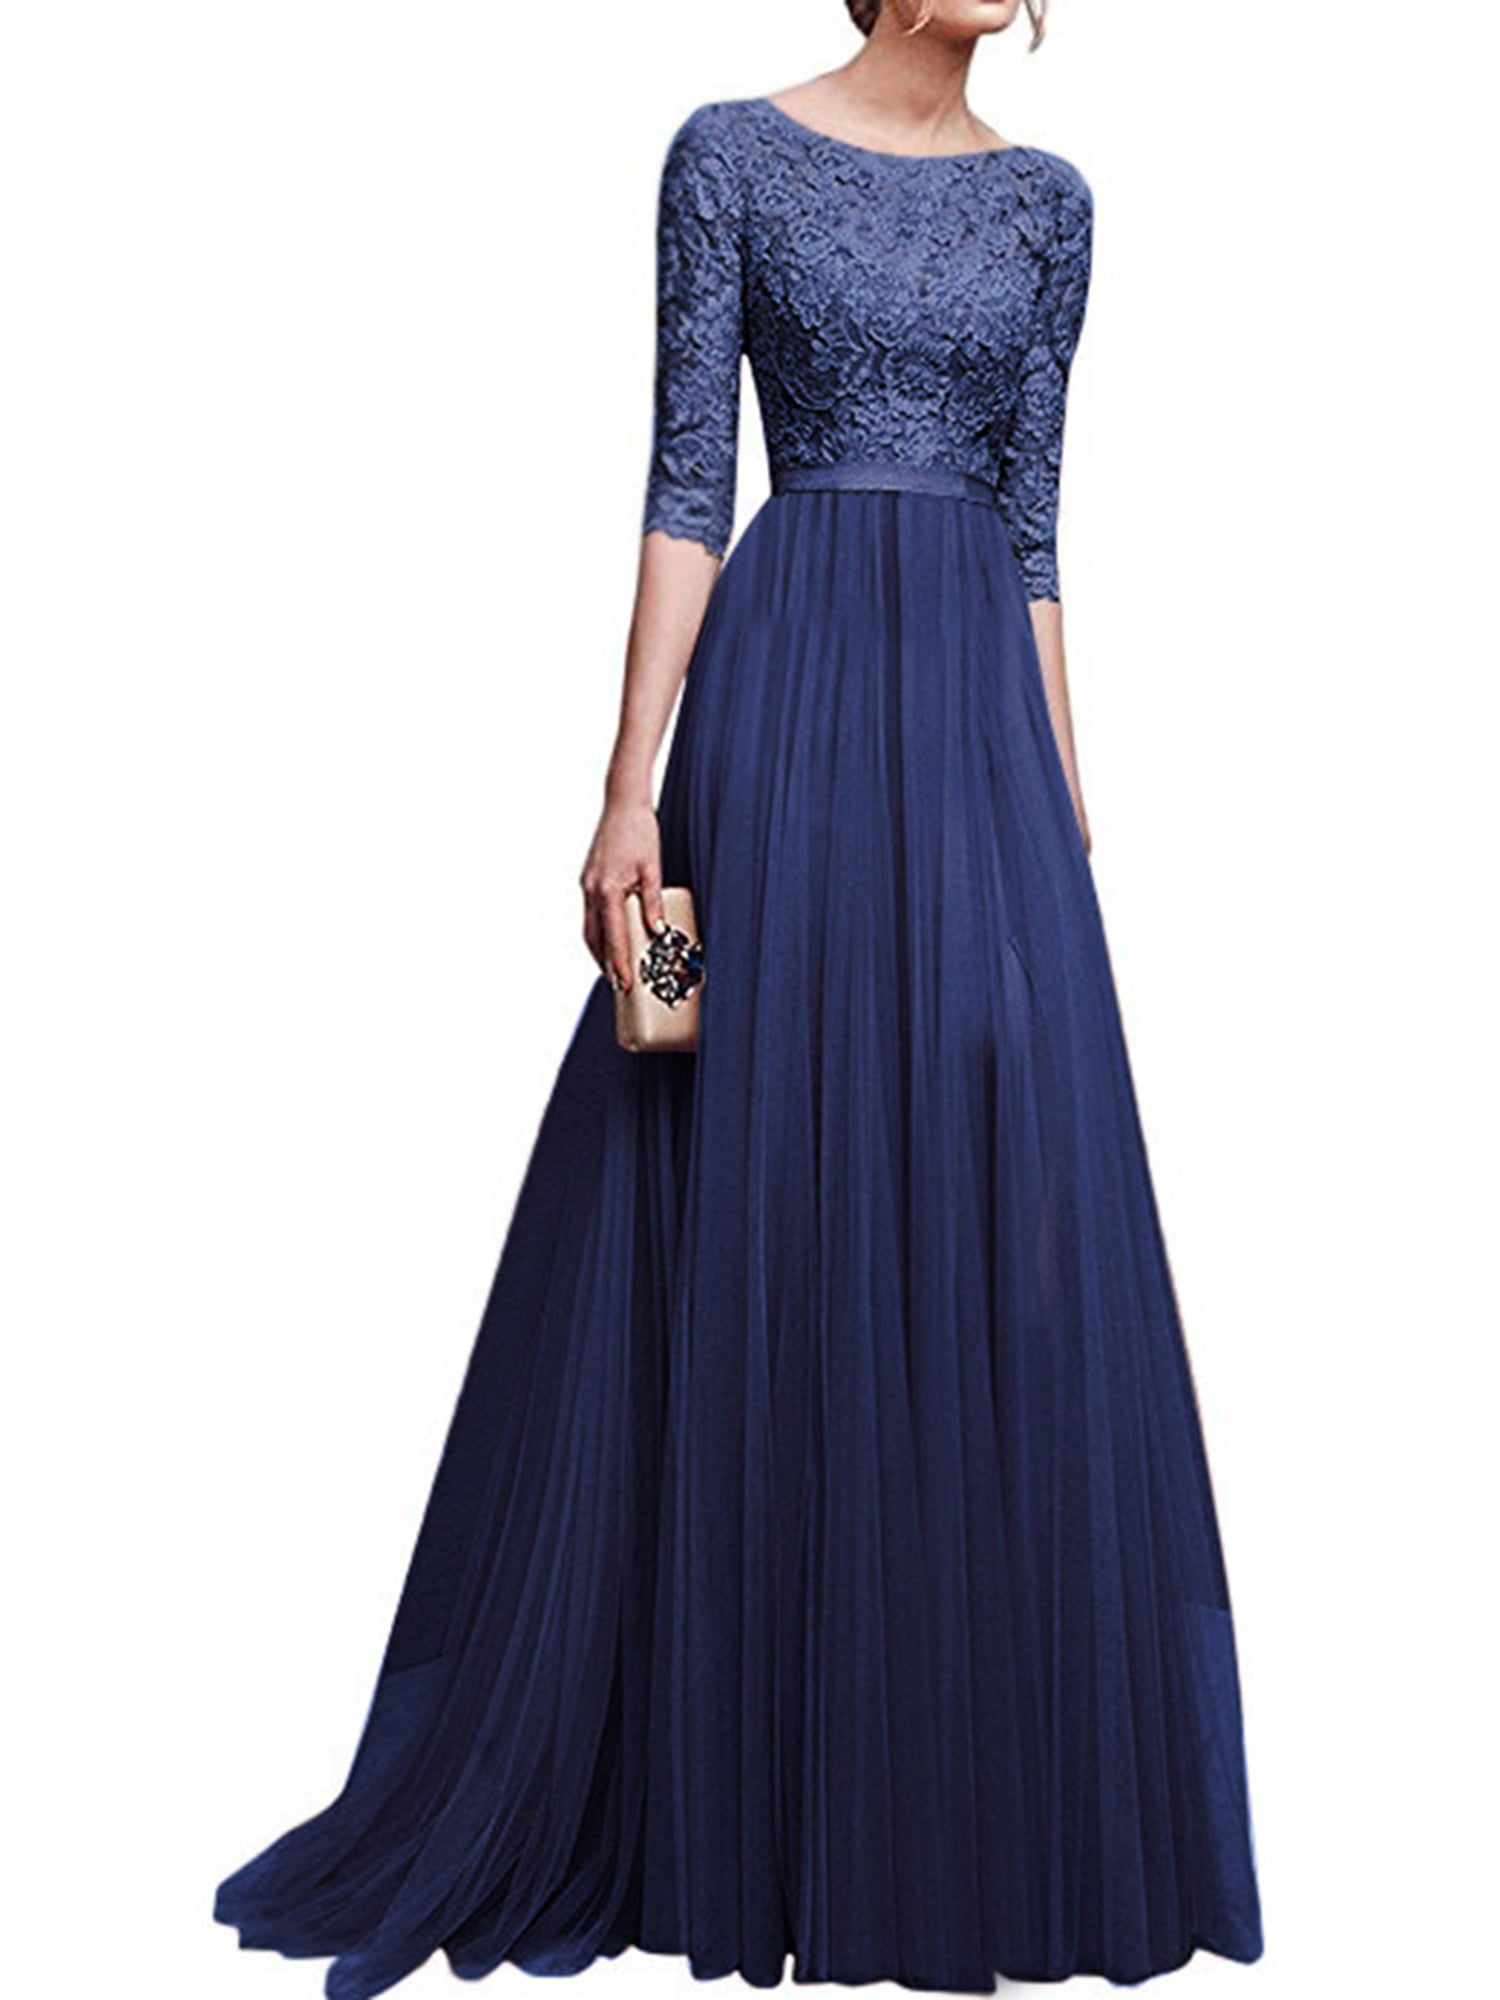 Women Evening Party Prom Dress Cocktail Wedding Bridesmaid Formal Long Dresses